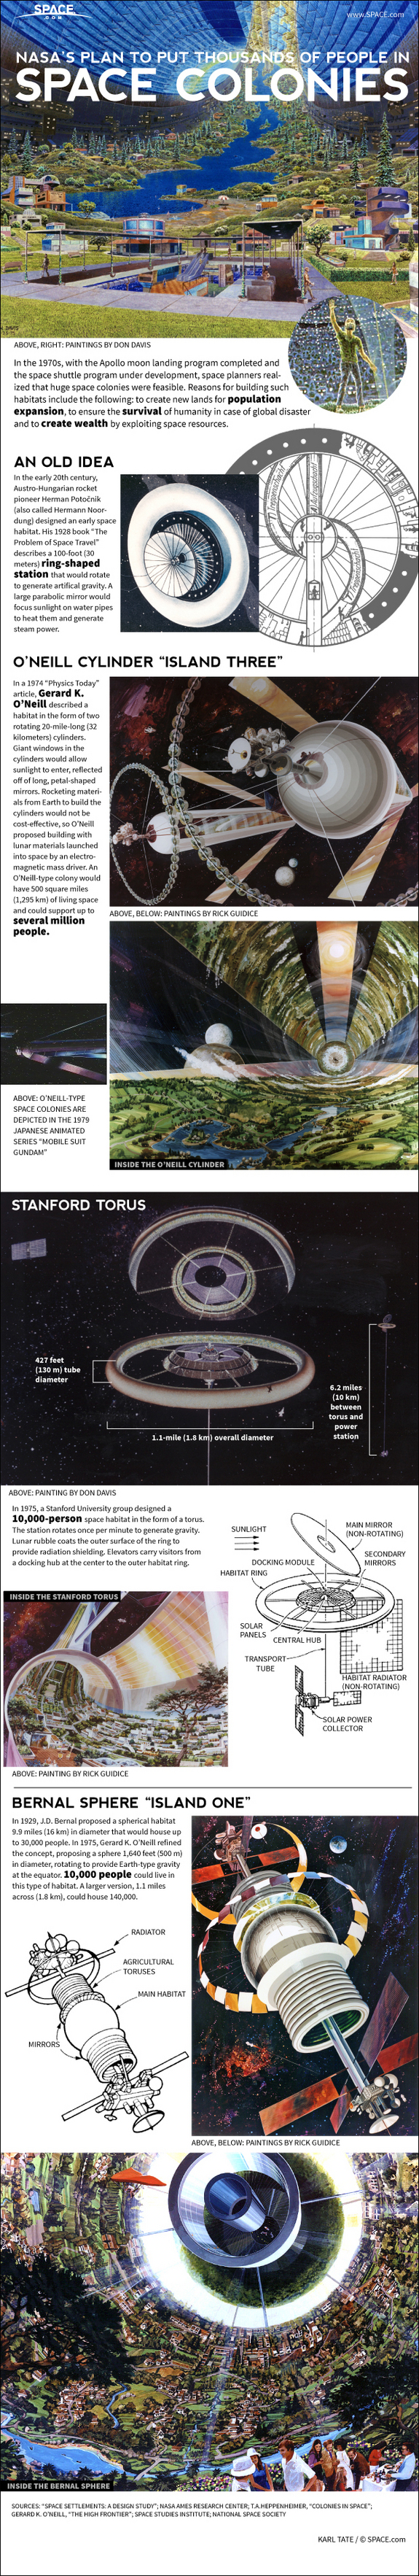 Find out about NASA's ambitious space colony plans in this SPACE.com infographic.